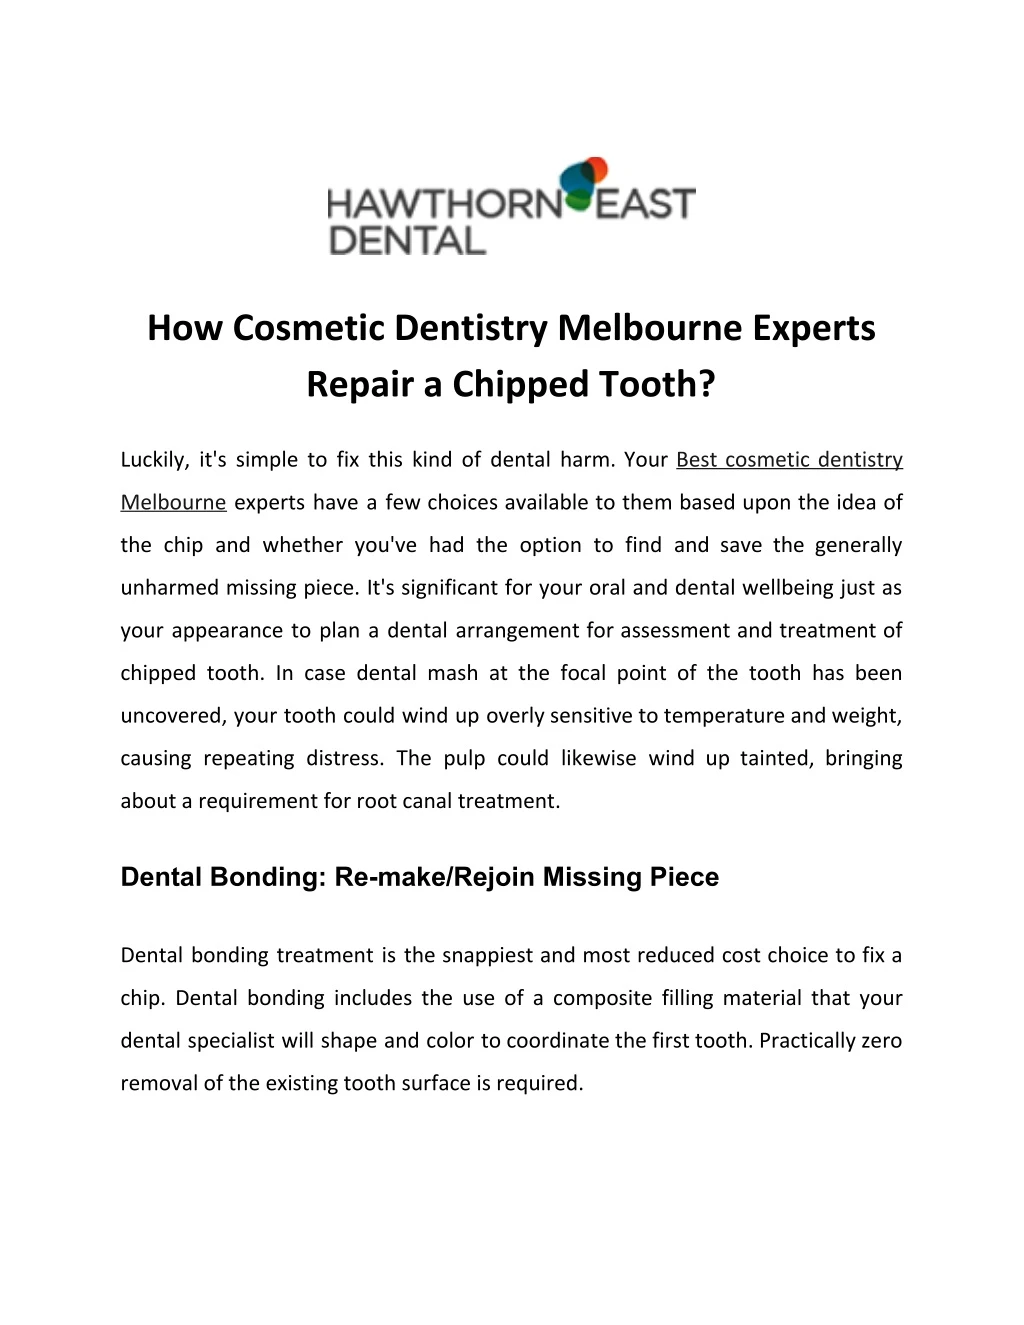 how cosmetic dentistry melbourne experts repair